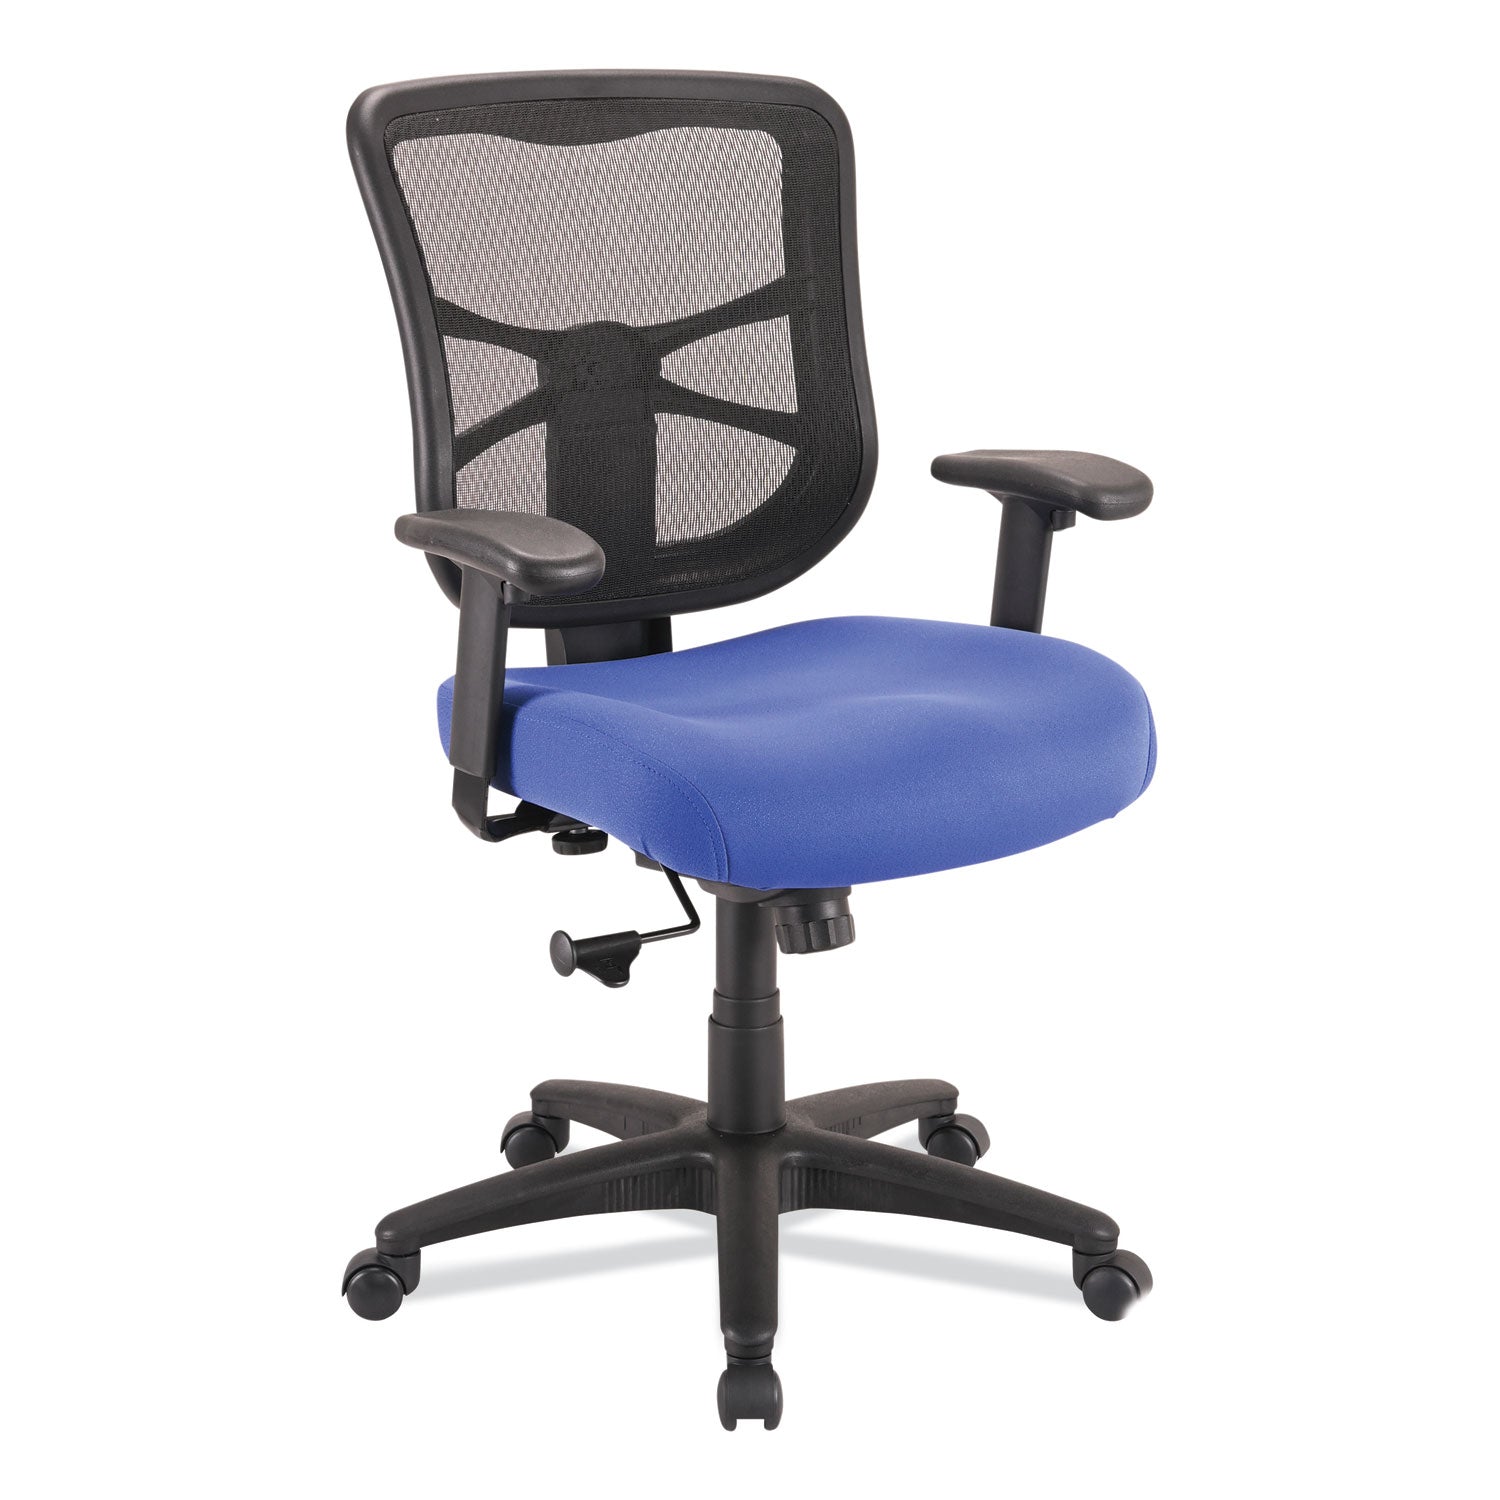 alera-elusion-series-mesh-mid-back-swivel-tilt-chair-supports-up-to-275-lb-179-to-218-seat-height-navy-seat_aleel42bme20b - 1